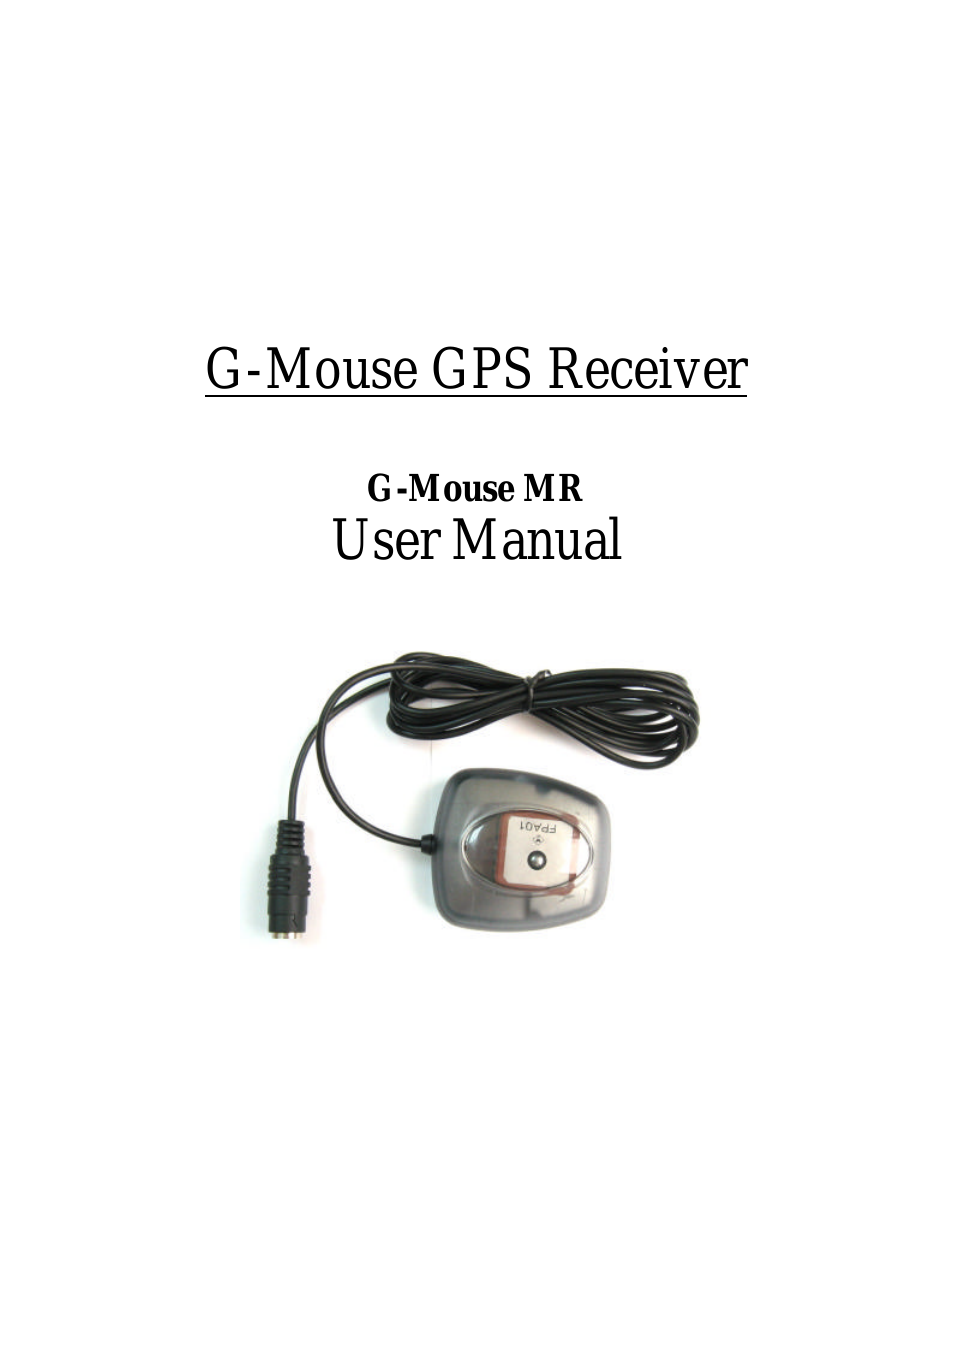 G- MR G-Mouse GPS Receiver G-Mouse MR